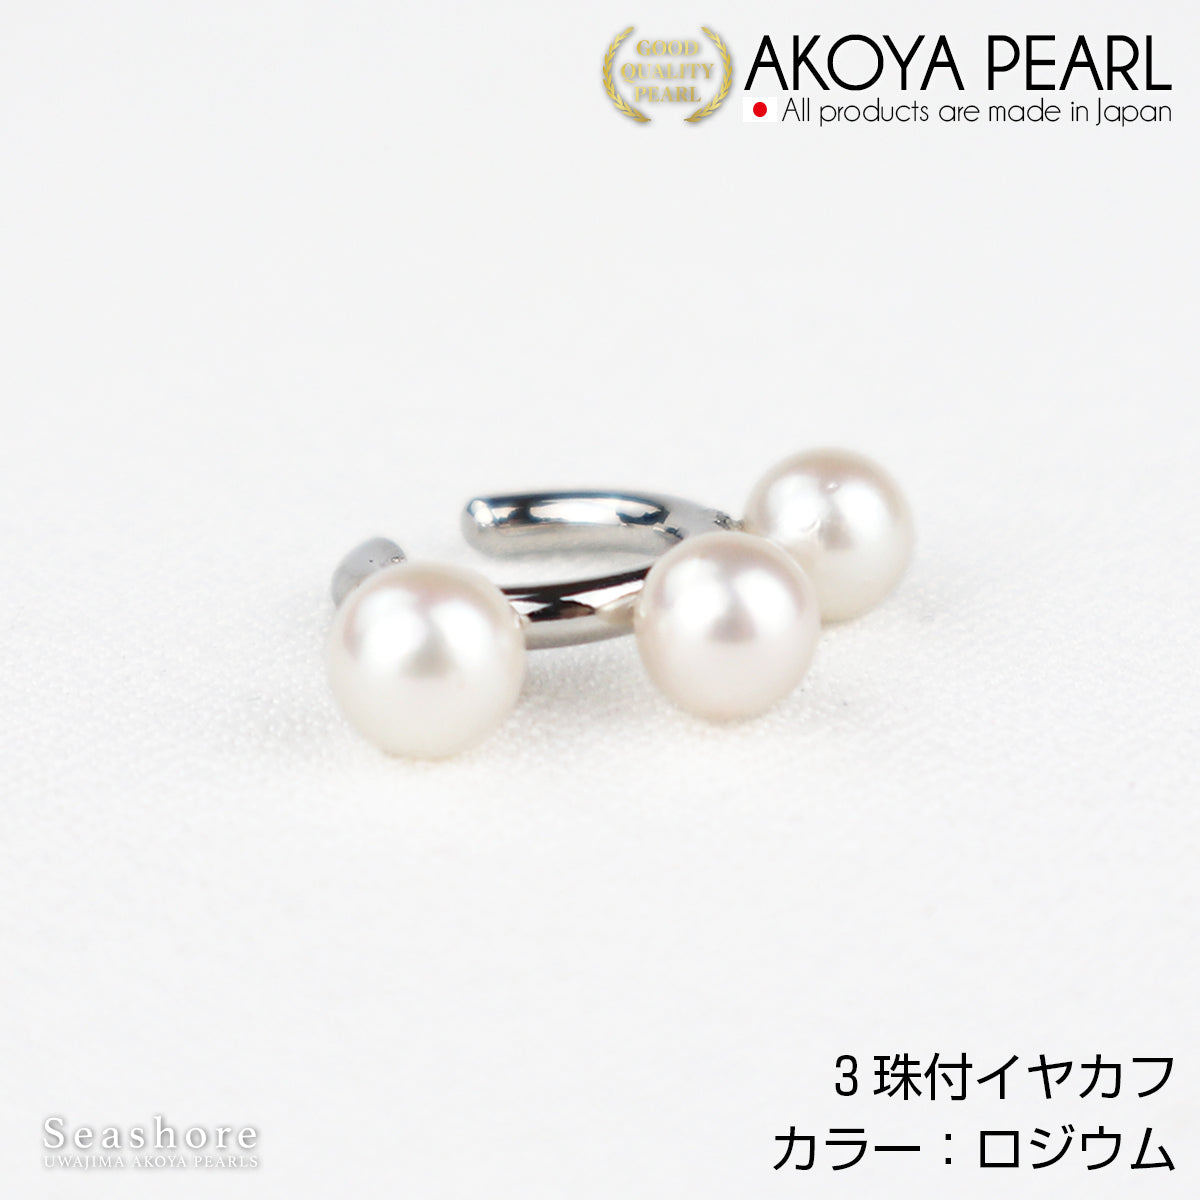 3 Akoya Pearls Pearl Ear Cuff for Ears [5.5-6.0mm] [3 Colors] Brass Rhodium/Pink Gold/Gold